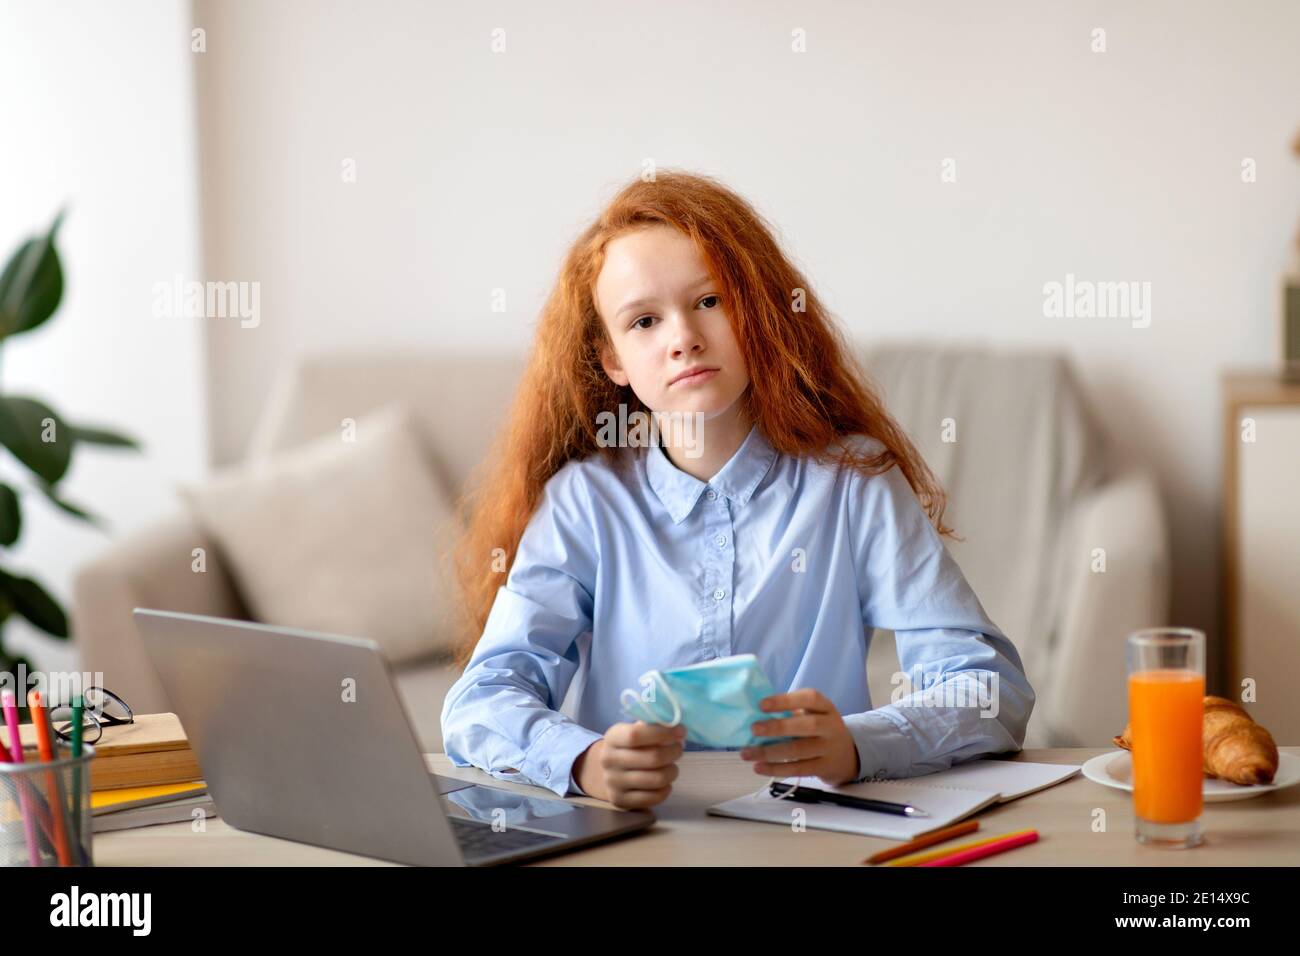 Sad girl holding medical mask studying at home with computer Stock Photo